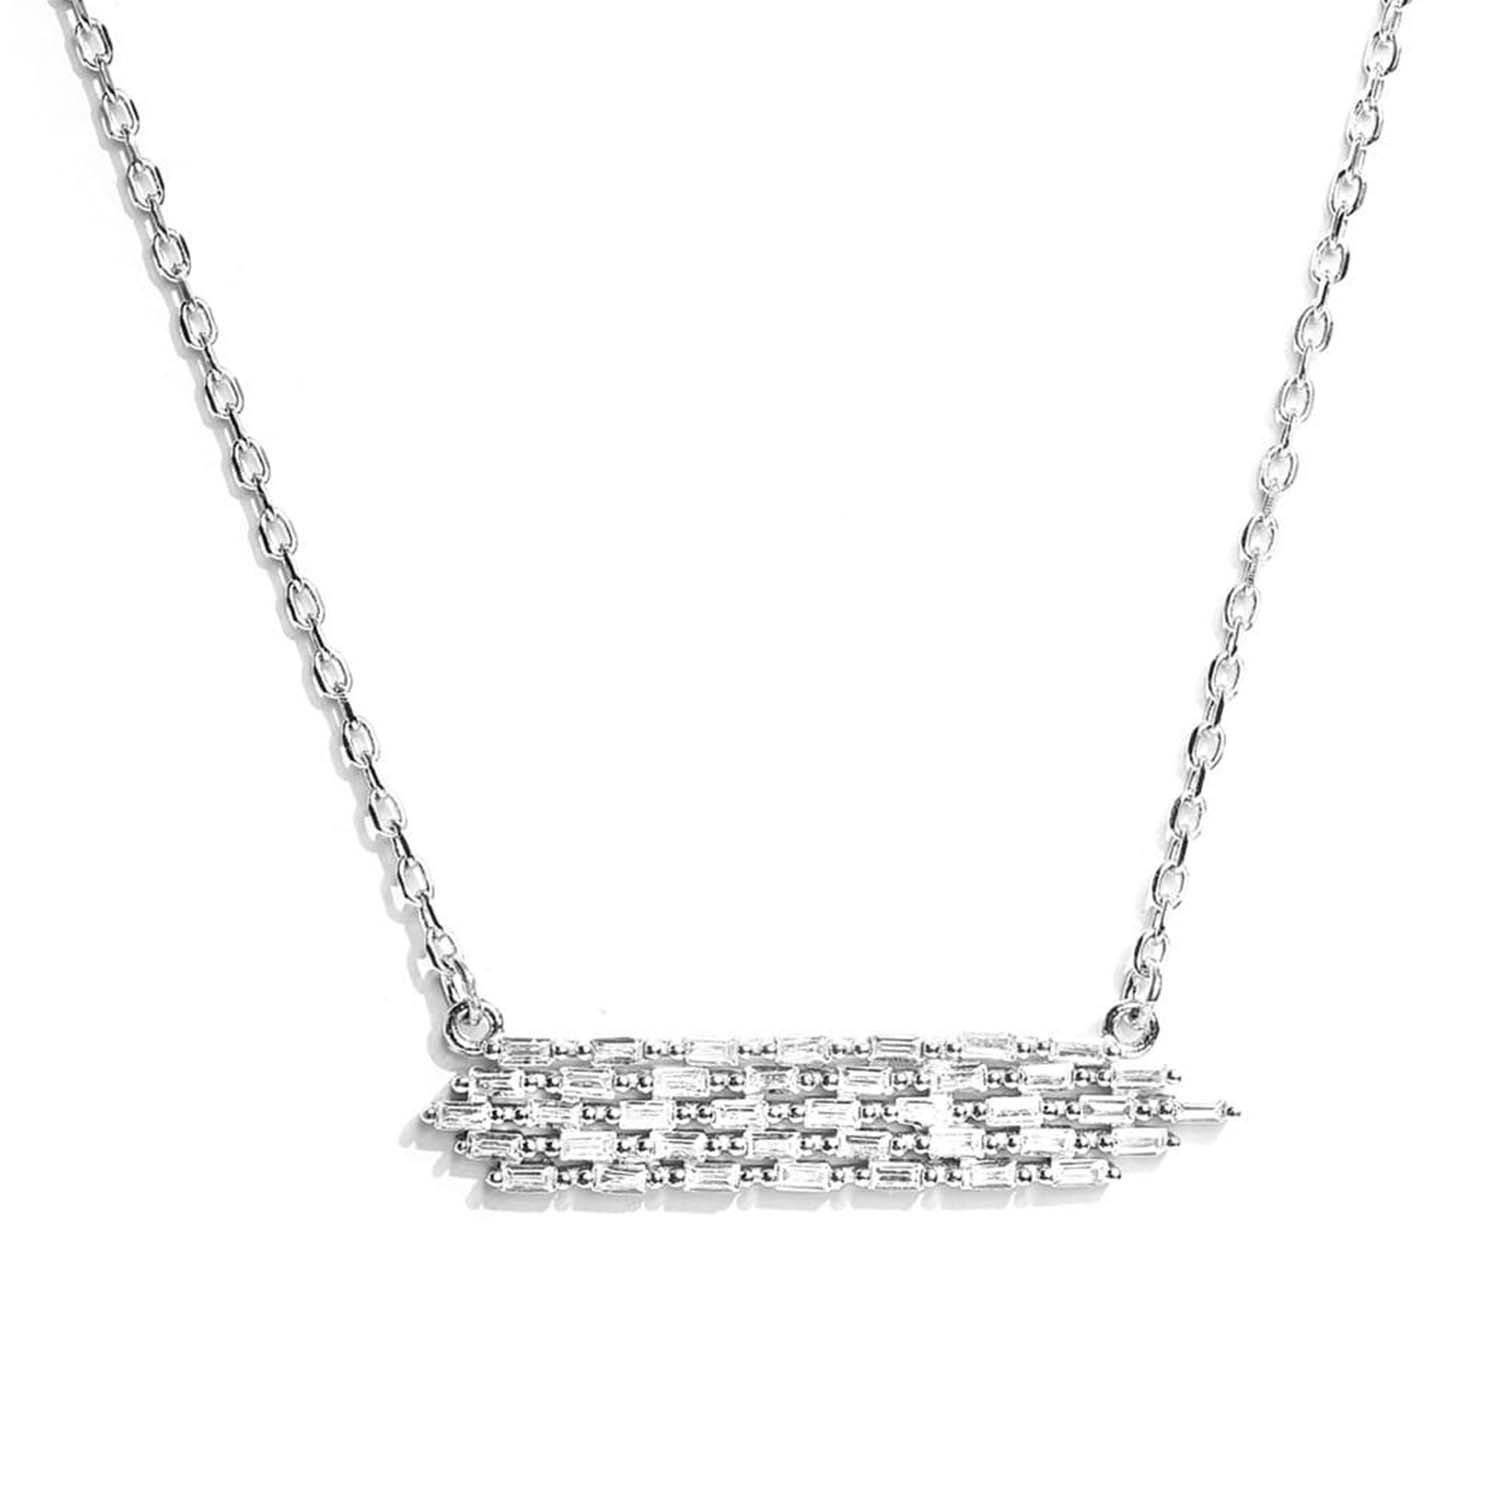 French Baguette 925 Silver Necklace